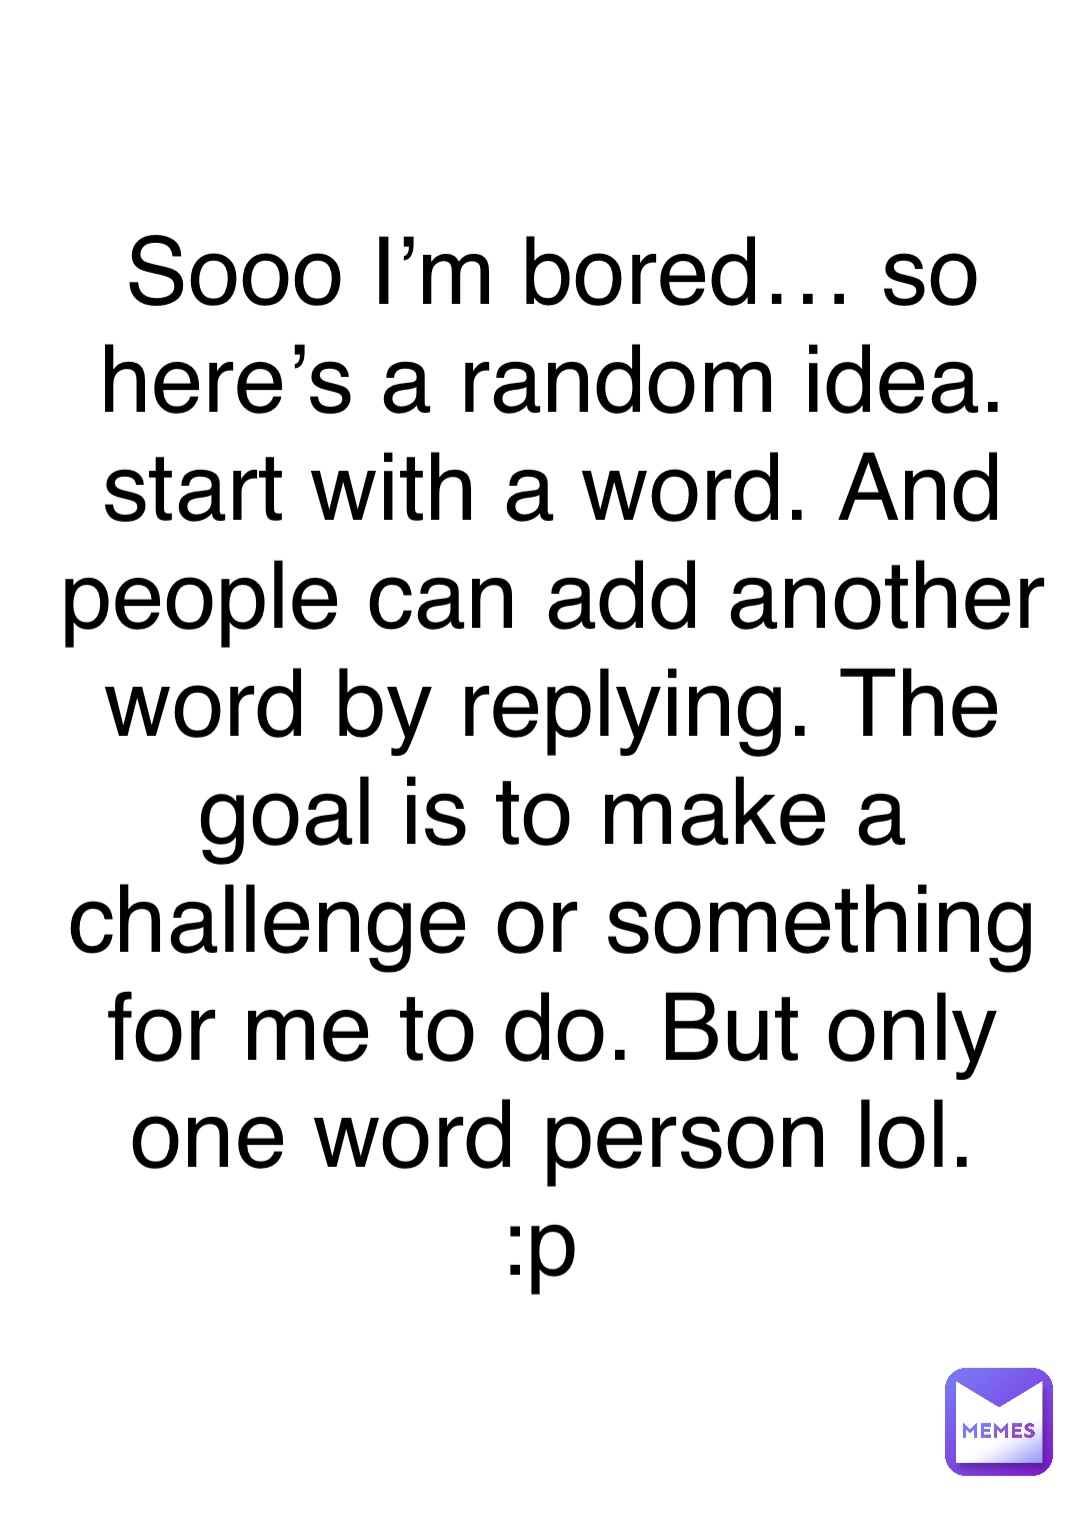 Double tap to edit Sooo I’m bored… so here’s a random idea. 
start with a word. And people can add another word by replying. The goal is to make a challenge or something for me to do. But only one word person lol. 
:p